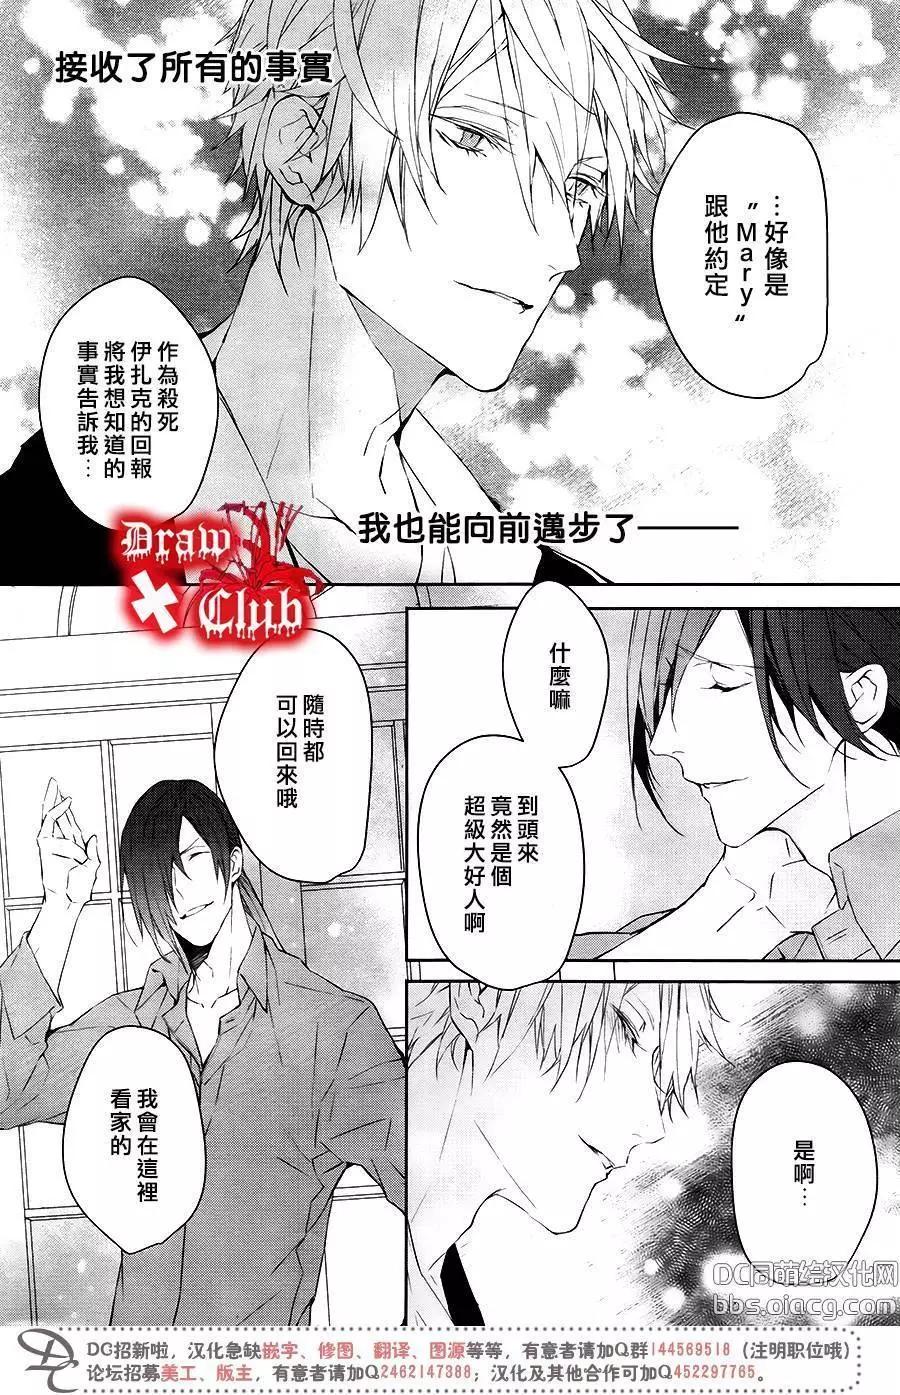 Bloody Mary - 第40回(1/2) - 3